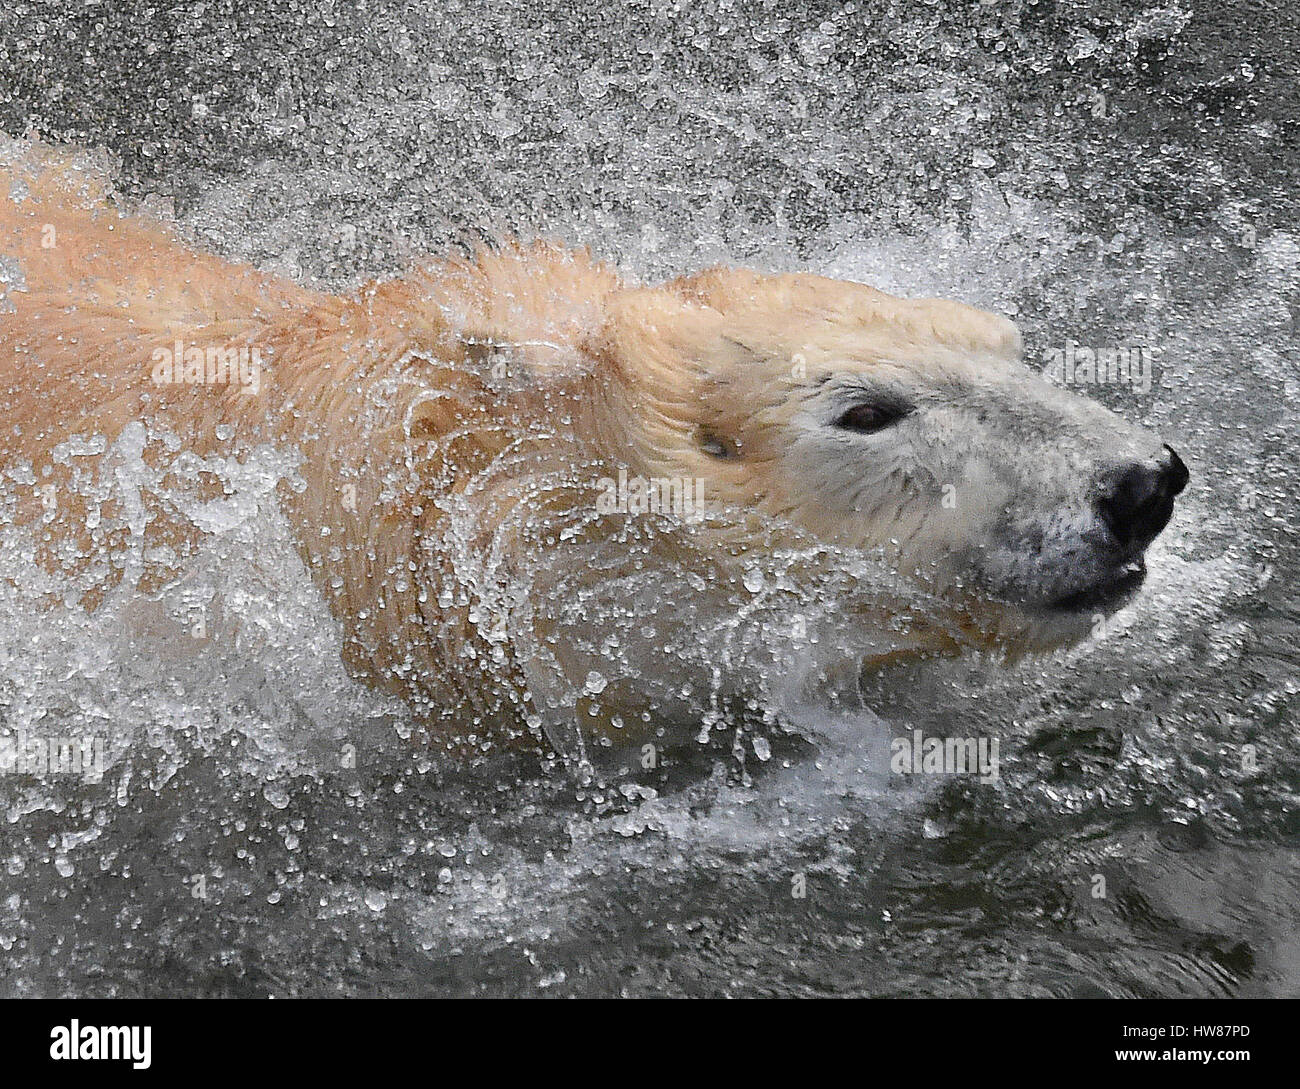 Hanover, Germany. 9th Mar, 2017. The new female polar bear Milana, photographed at the zoo in Hanover, Germany, 9 March 2017. Milana moved to Hanover from the zoo in Moscow at the end of January. Photo: Holger Hollemann/dpa/Alamy Live News Stock Photo